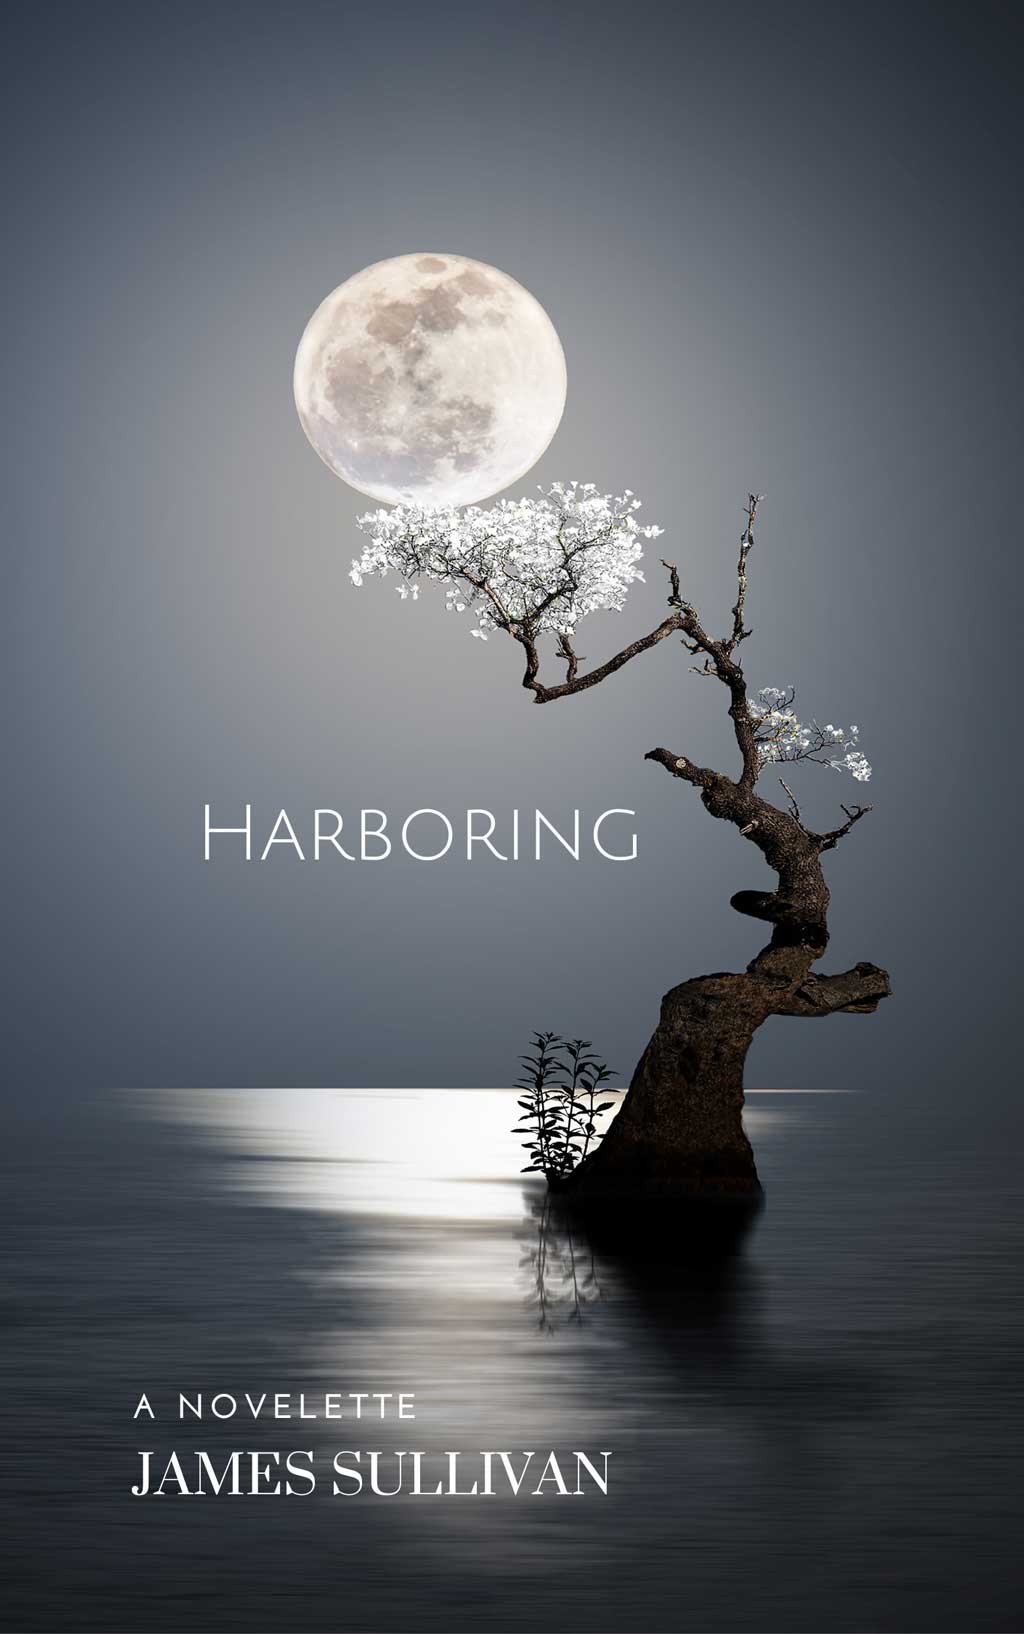 A Conversation with James Sullivan, Author of HARBORING by Justin Eells